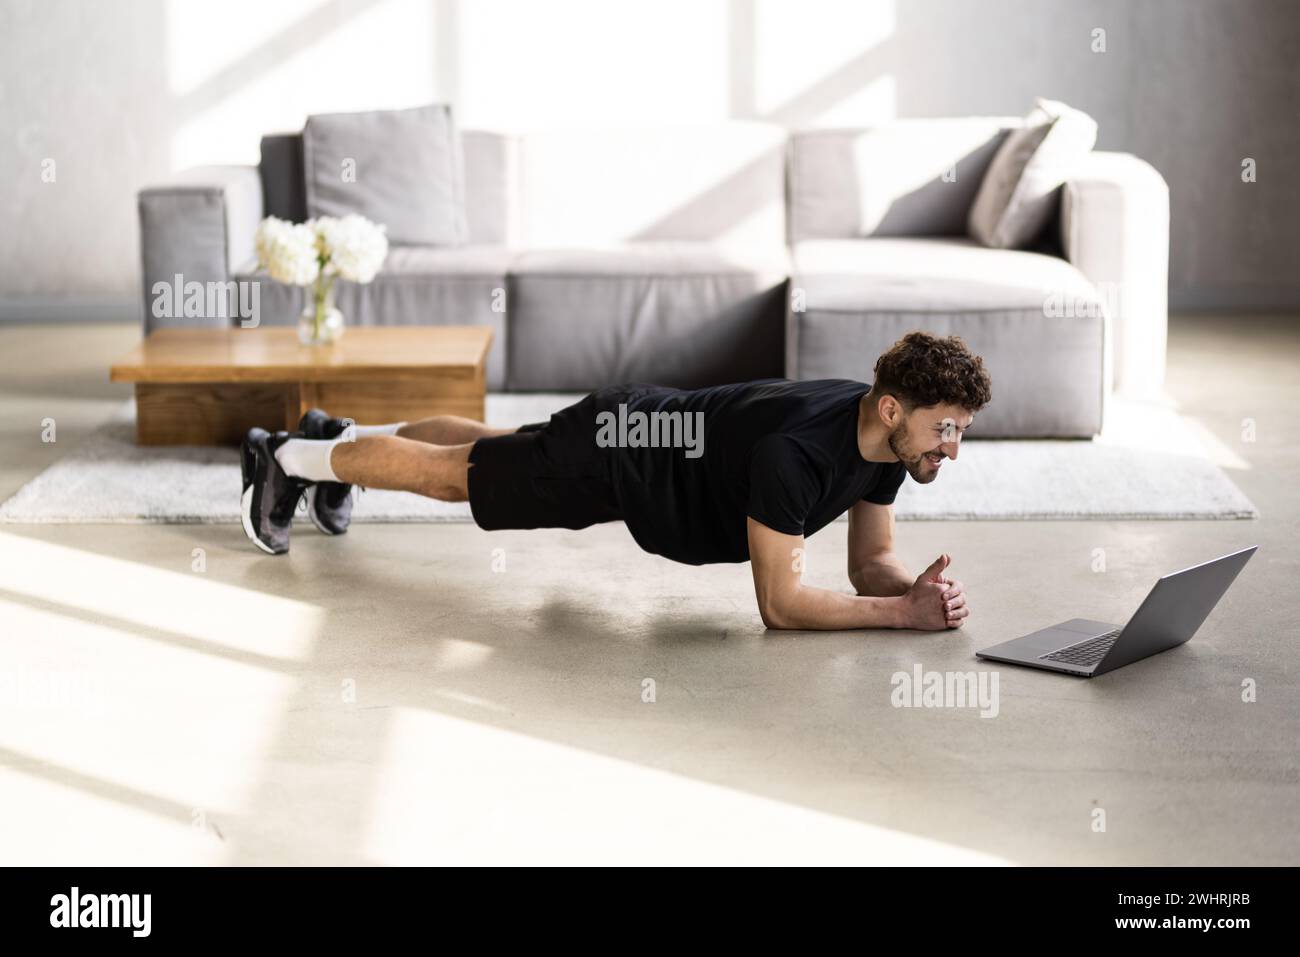 Online workout. Young man doing plank exercise with online tutorial at home, panorama, free space Stock Photo